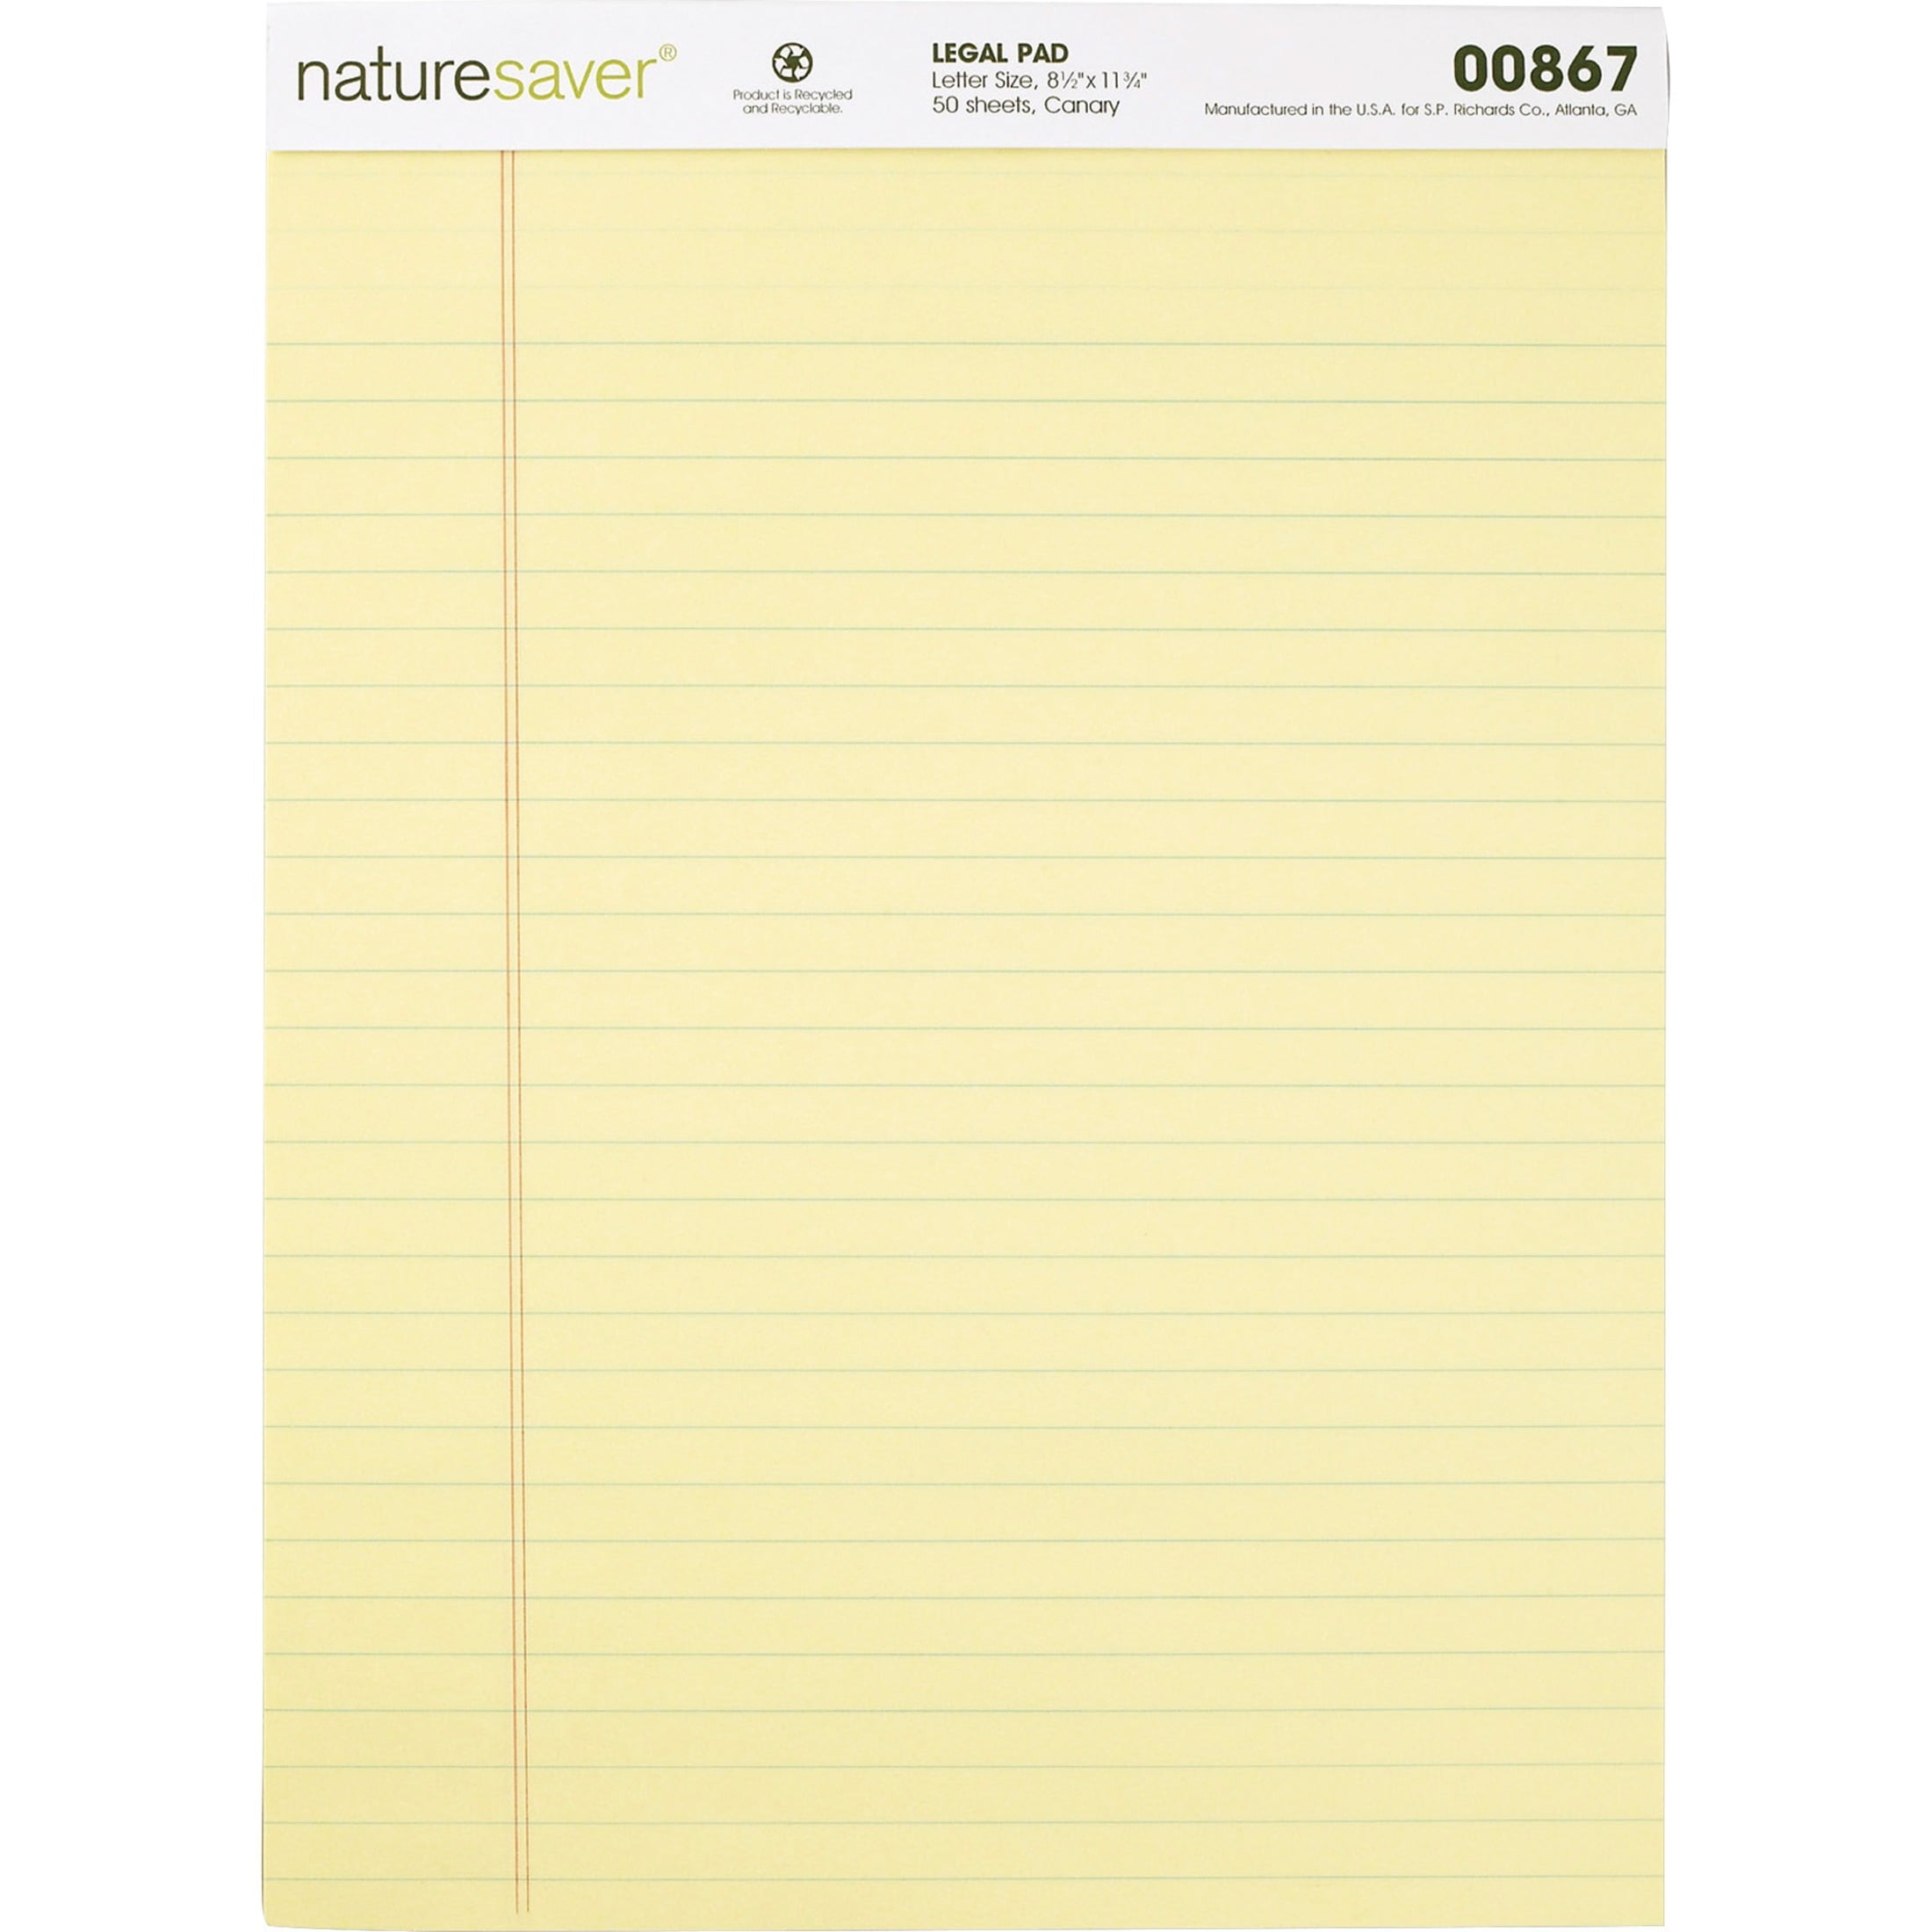 Universal 10630 Perforated Writing Pad Letter Size Canary 12 50-Sheet Pads